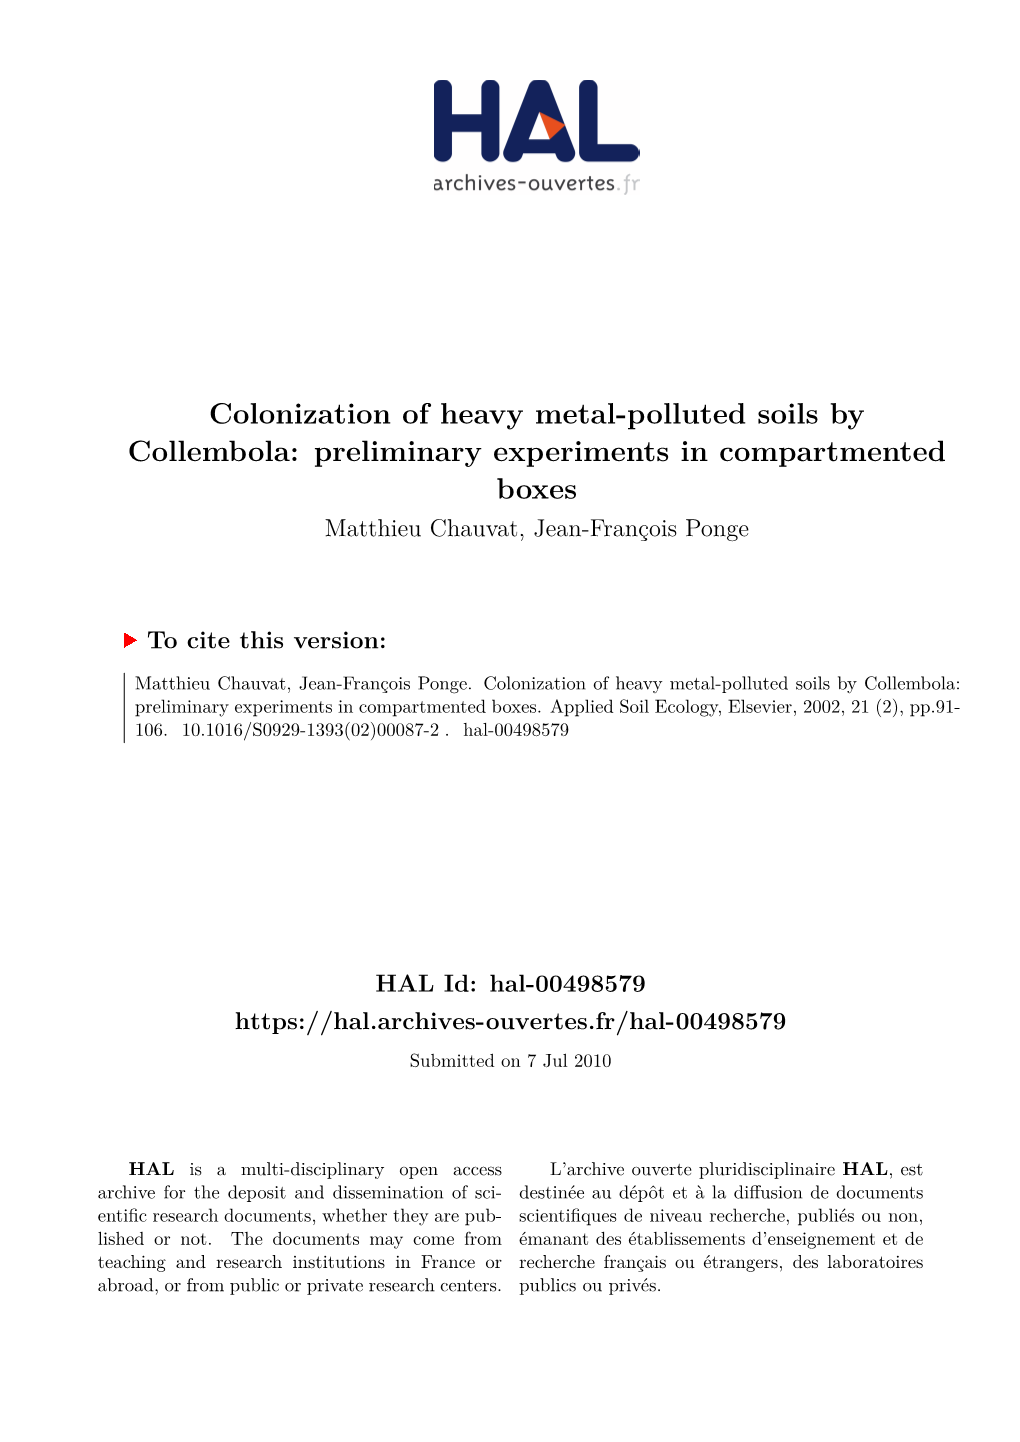 Colonization of Heavy Metal-Polluted Soils by Collembola: Preliminary Experiments in Compartmented Boxes Matthieu Chauvat, Jean-François Ponge